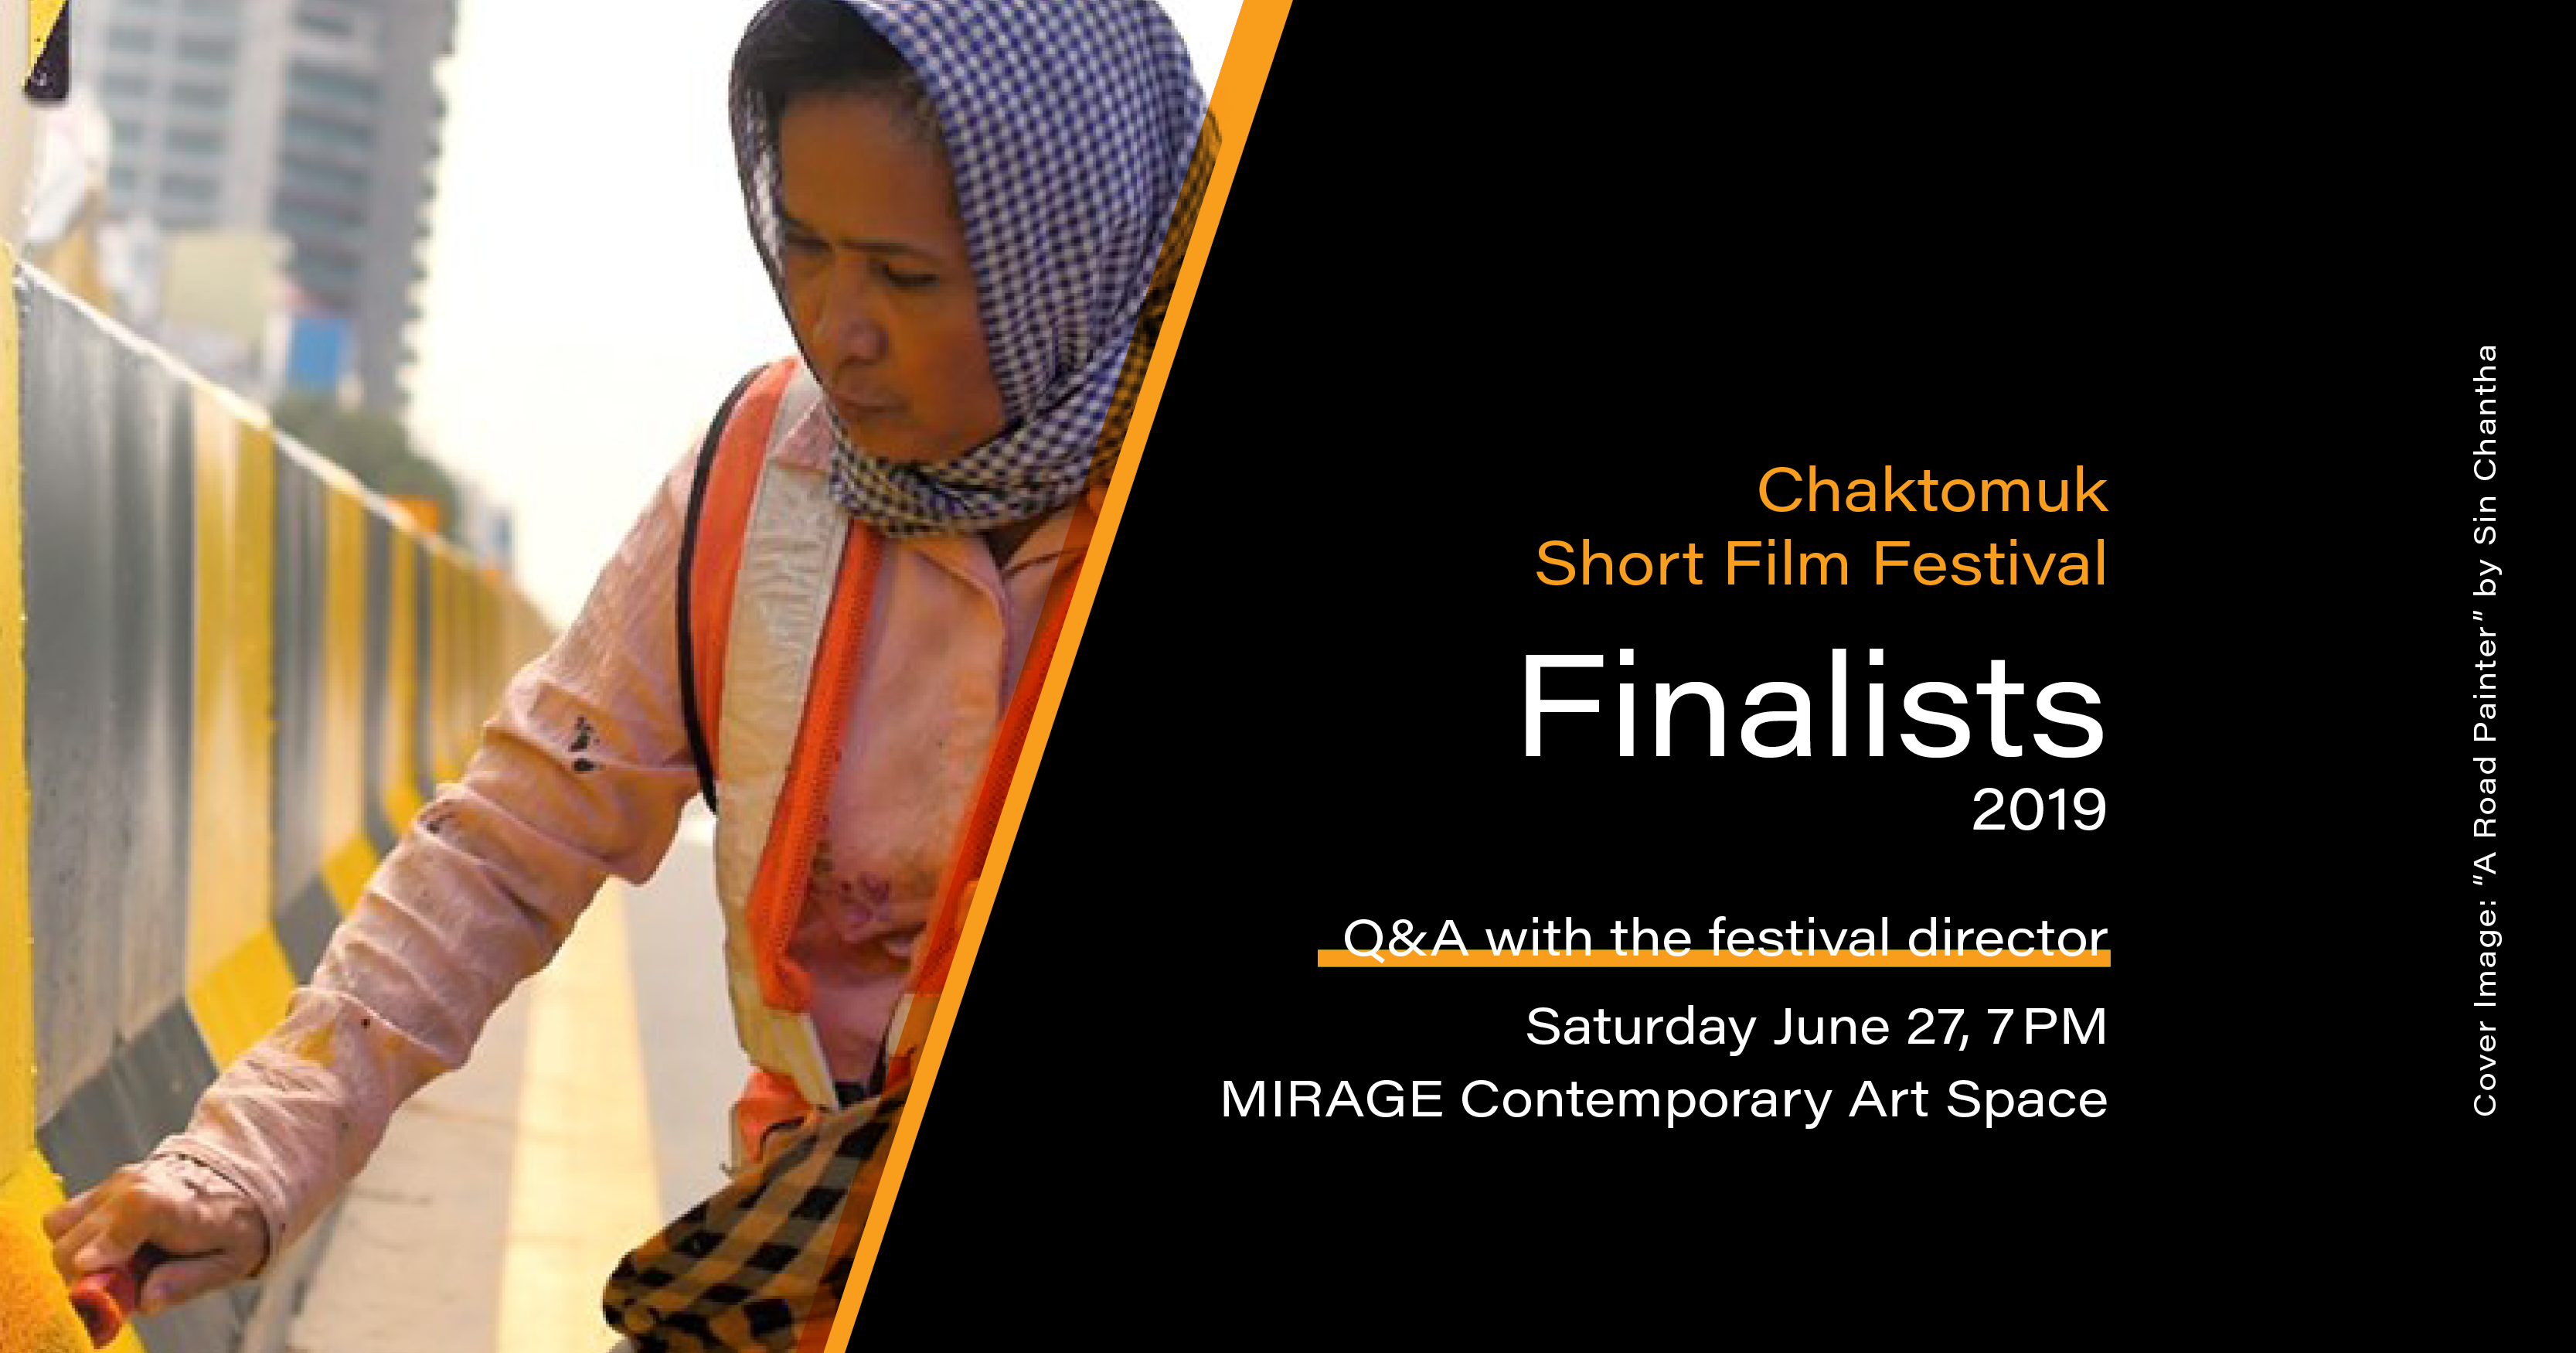 Chaktomuk Short Film Festival at MIRAGE Contemporary Art Space in Siem Reap, Cambodia